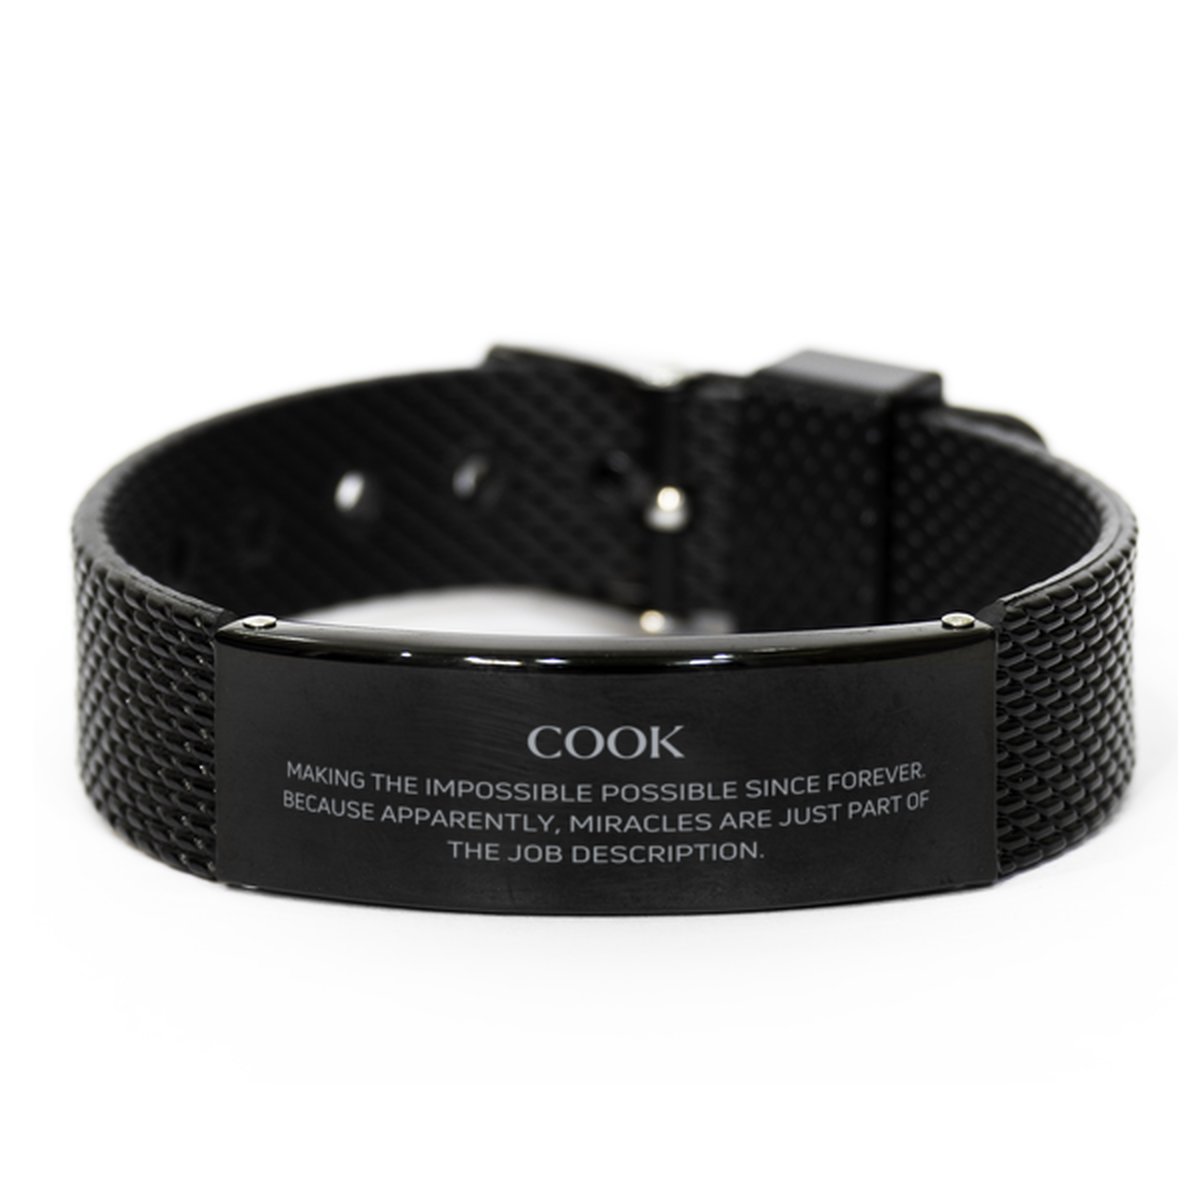 Funny Cook Gifts, Miracles are just part of the job description, Inspirational Birthday Black Shark Mesh Bracelet For Cook, Men, Women, Coworkers, Friends, Boss